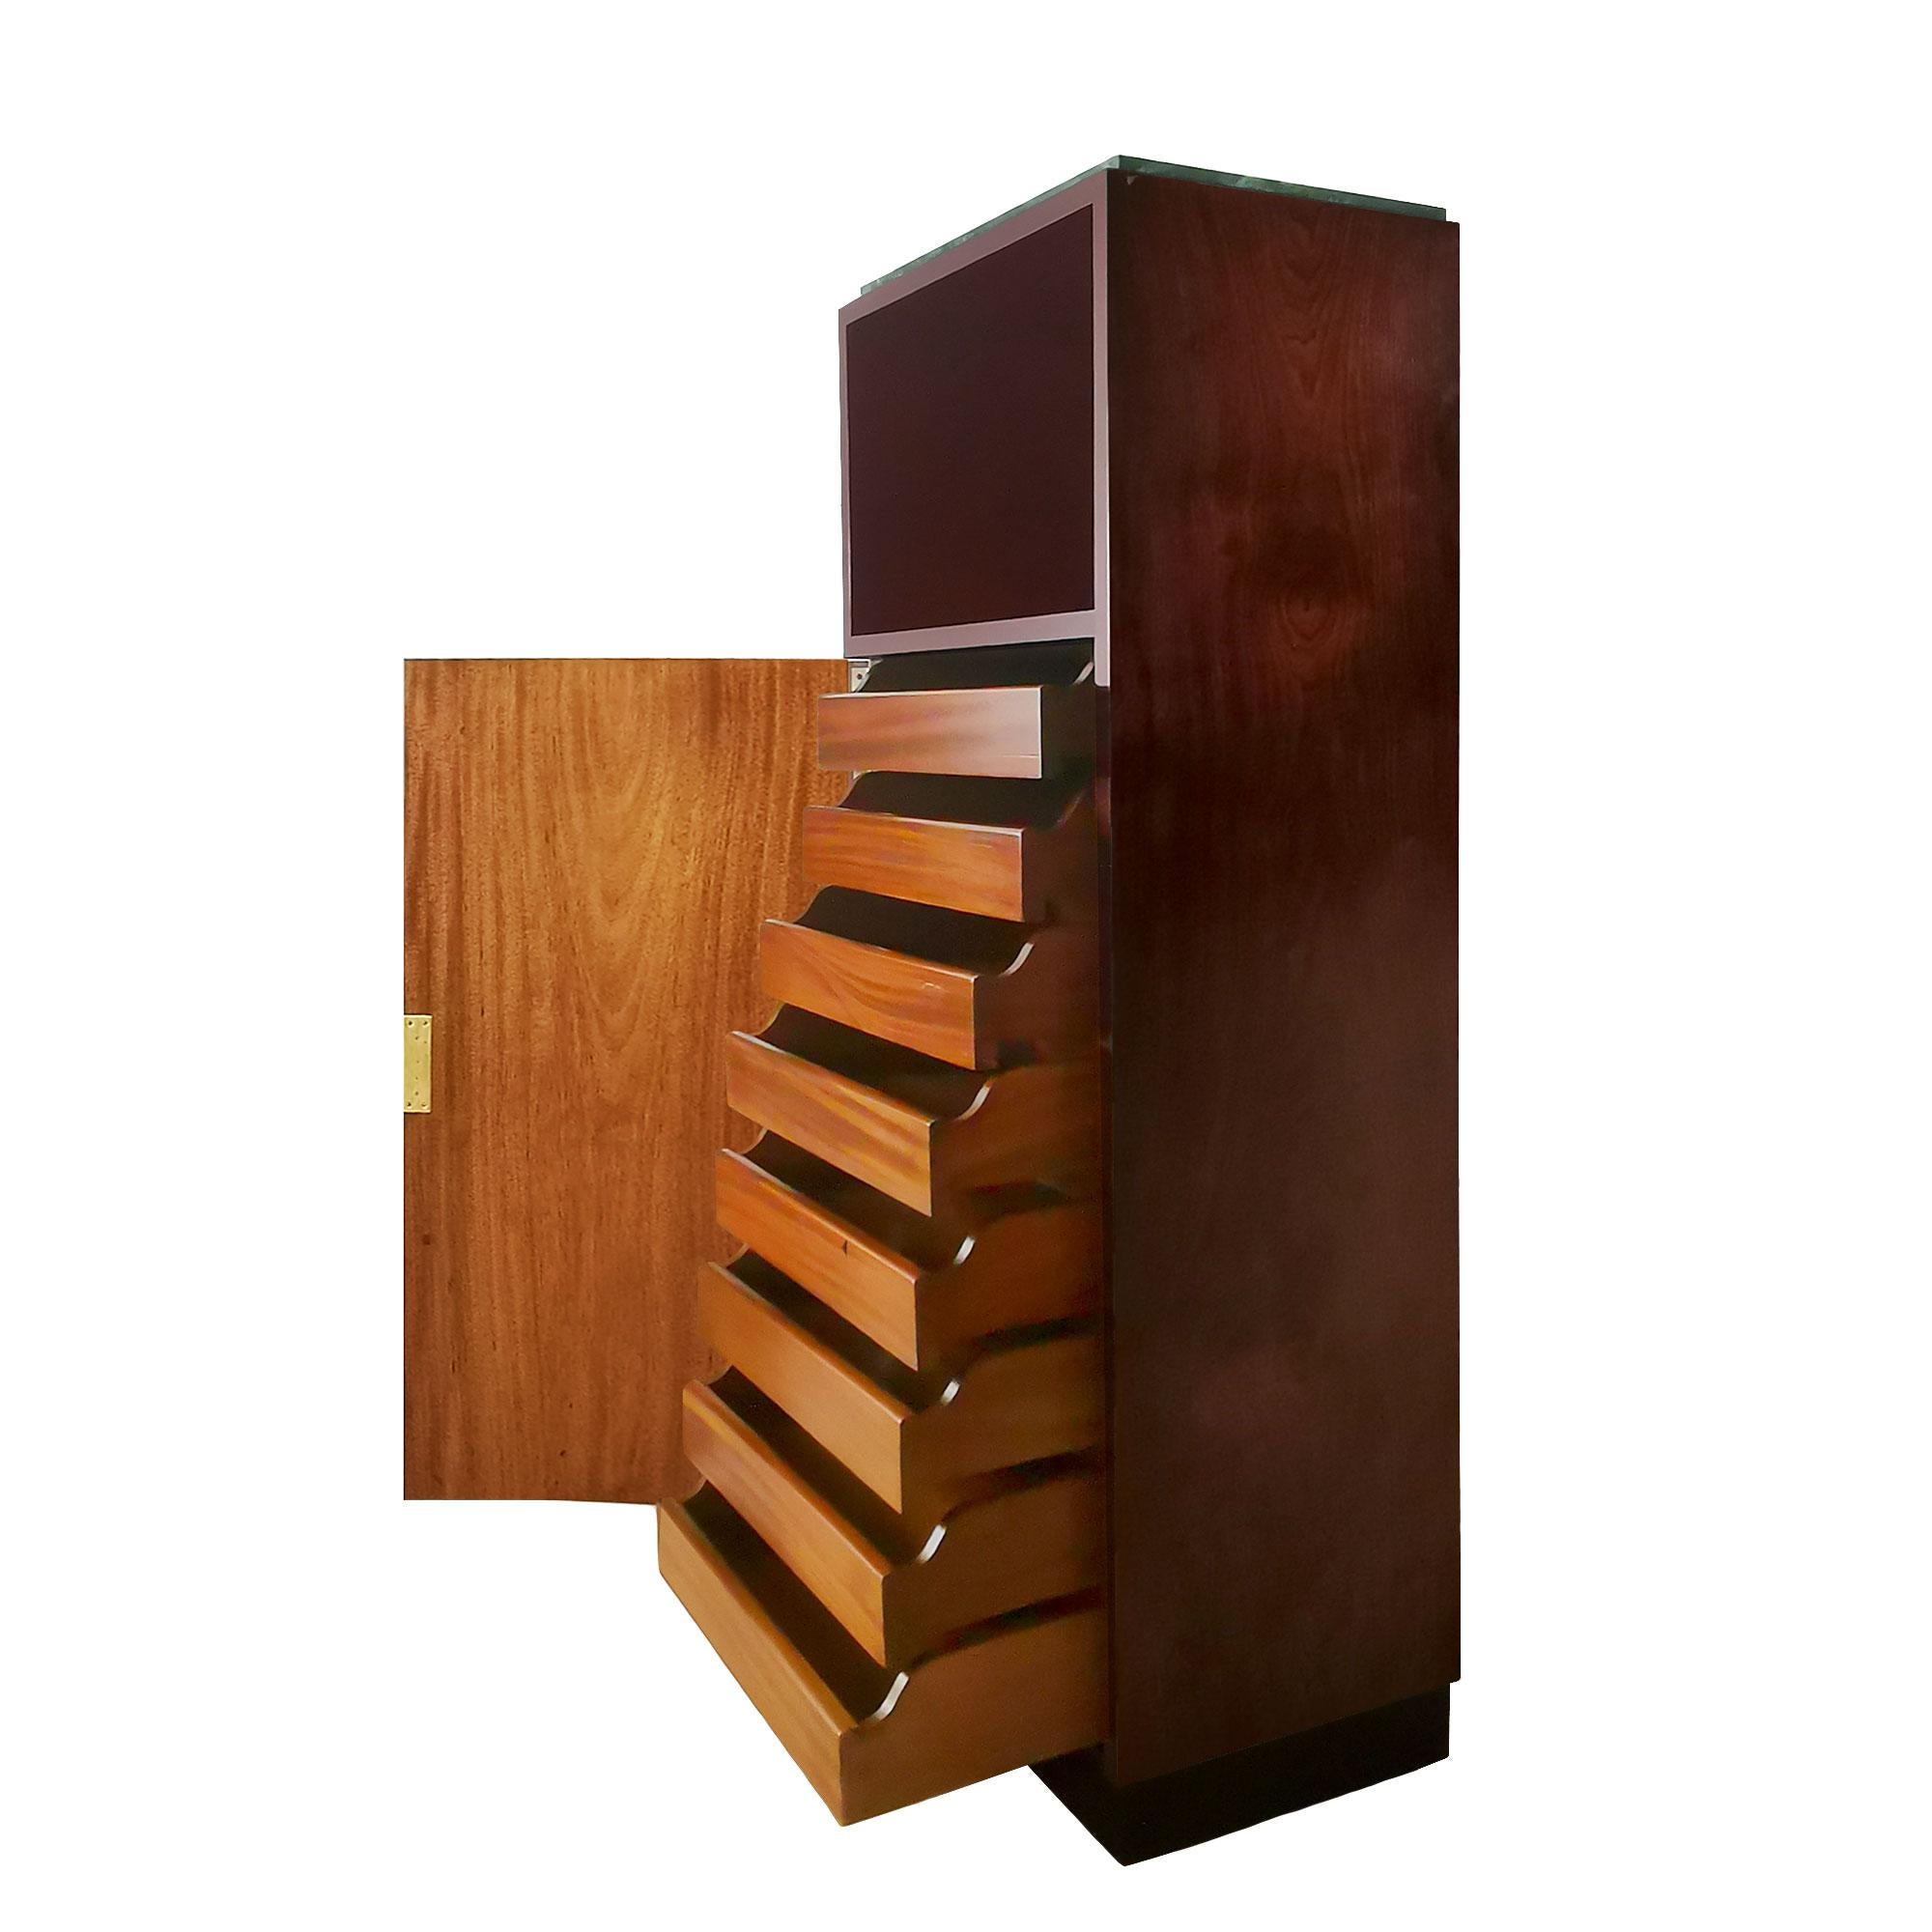 Mid-20th Century Pair of Mid-Century Modern Cabinets in Solid Mahogany and Marble on Top - France For Sale